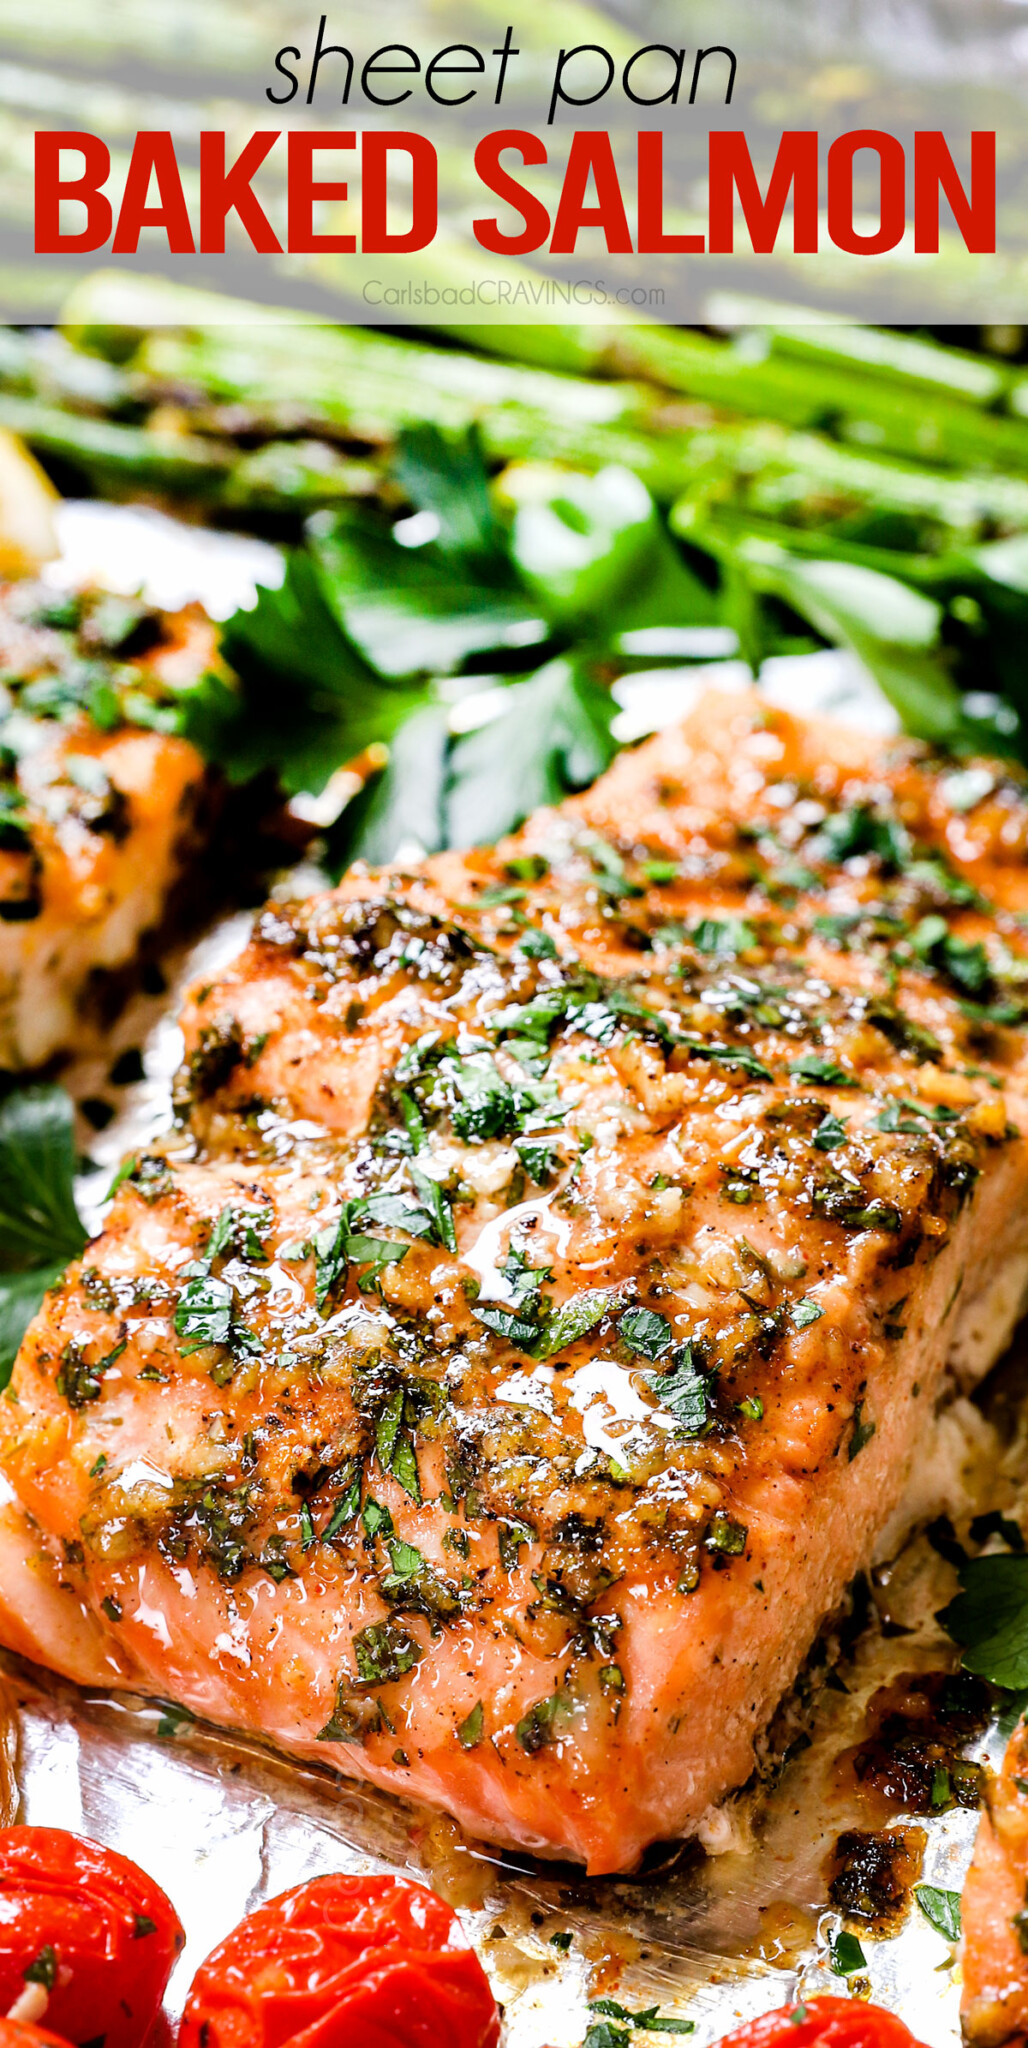 Oven Baked Salmon Recipe - Carlsbad Cravings